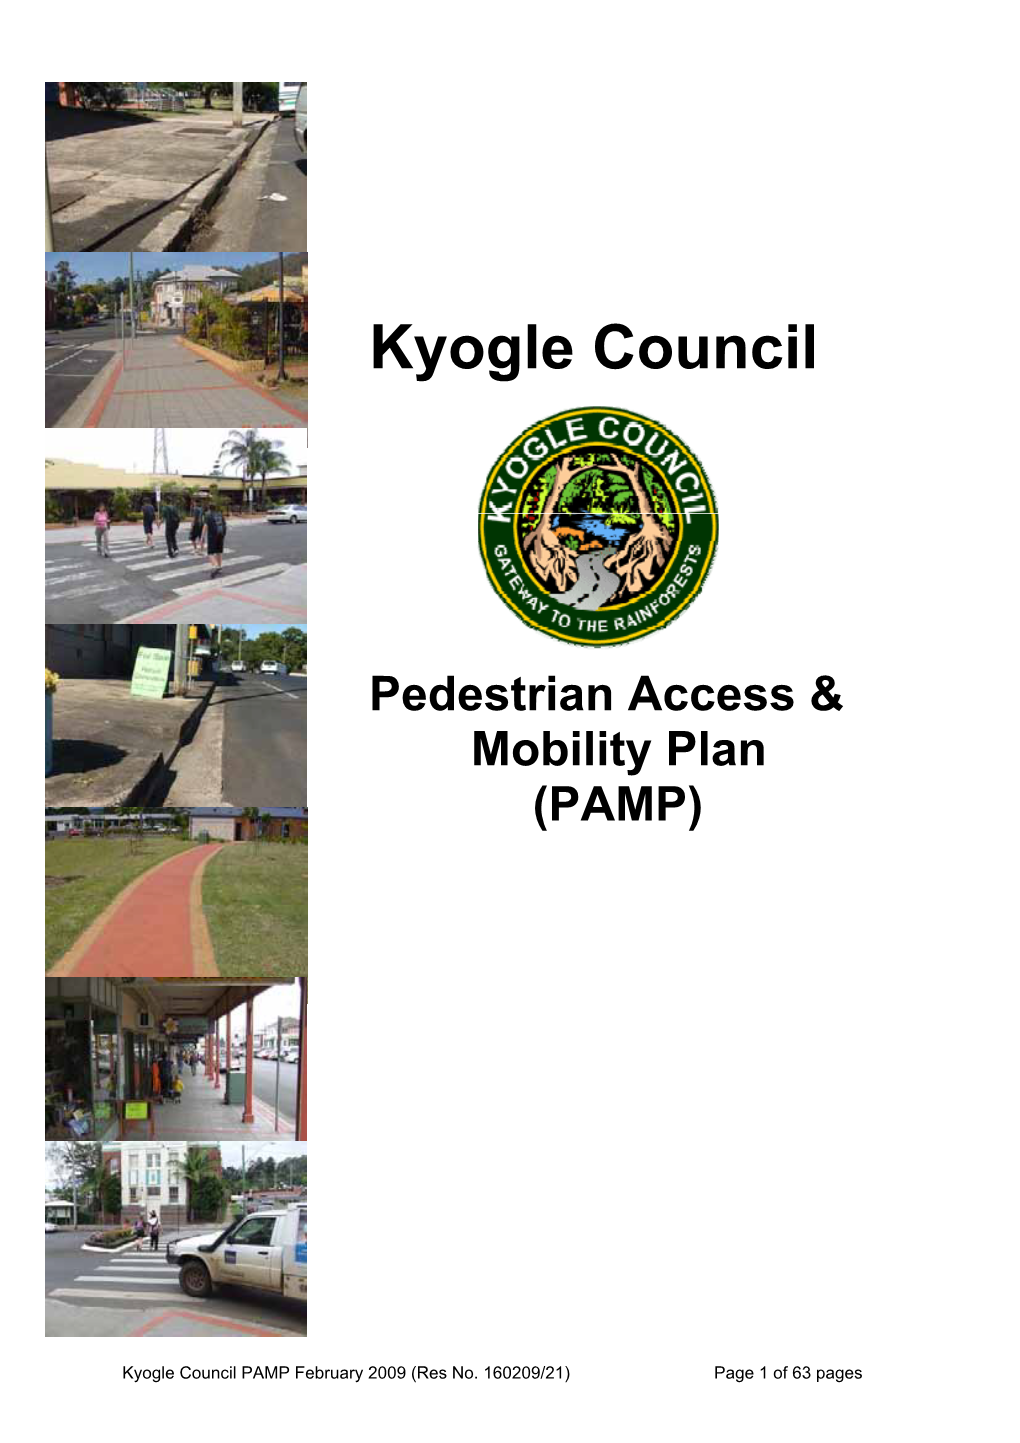 Pedestrian Access and Mobility Plan (PAMP) Program to Ensure Better Planning for Pedestrians